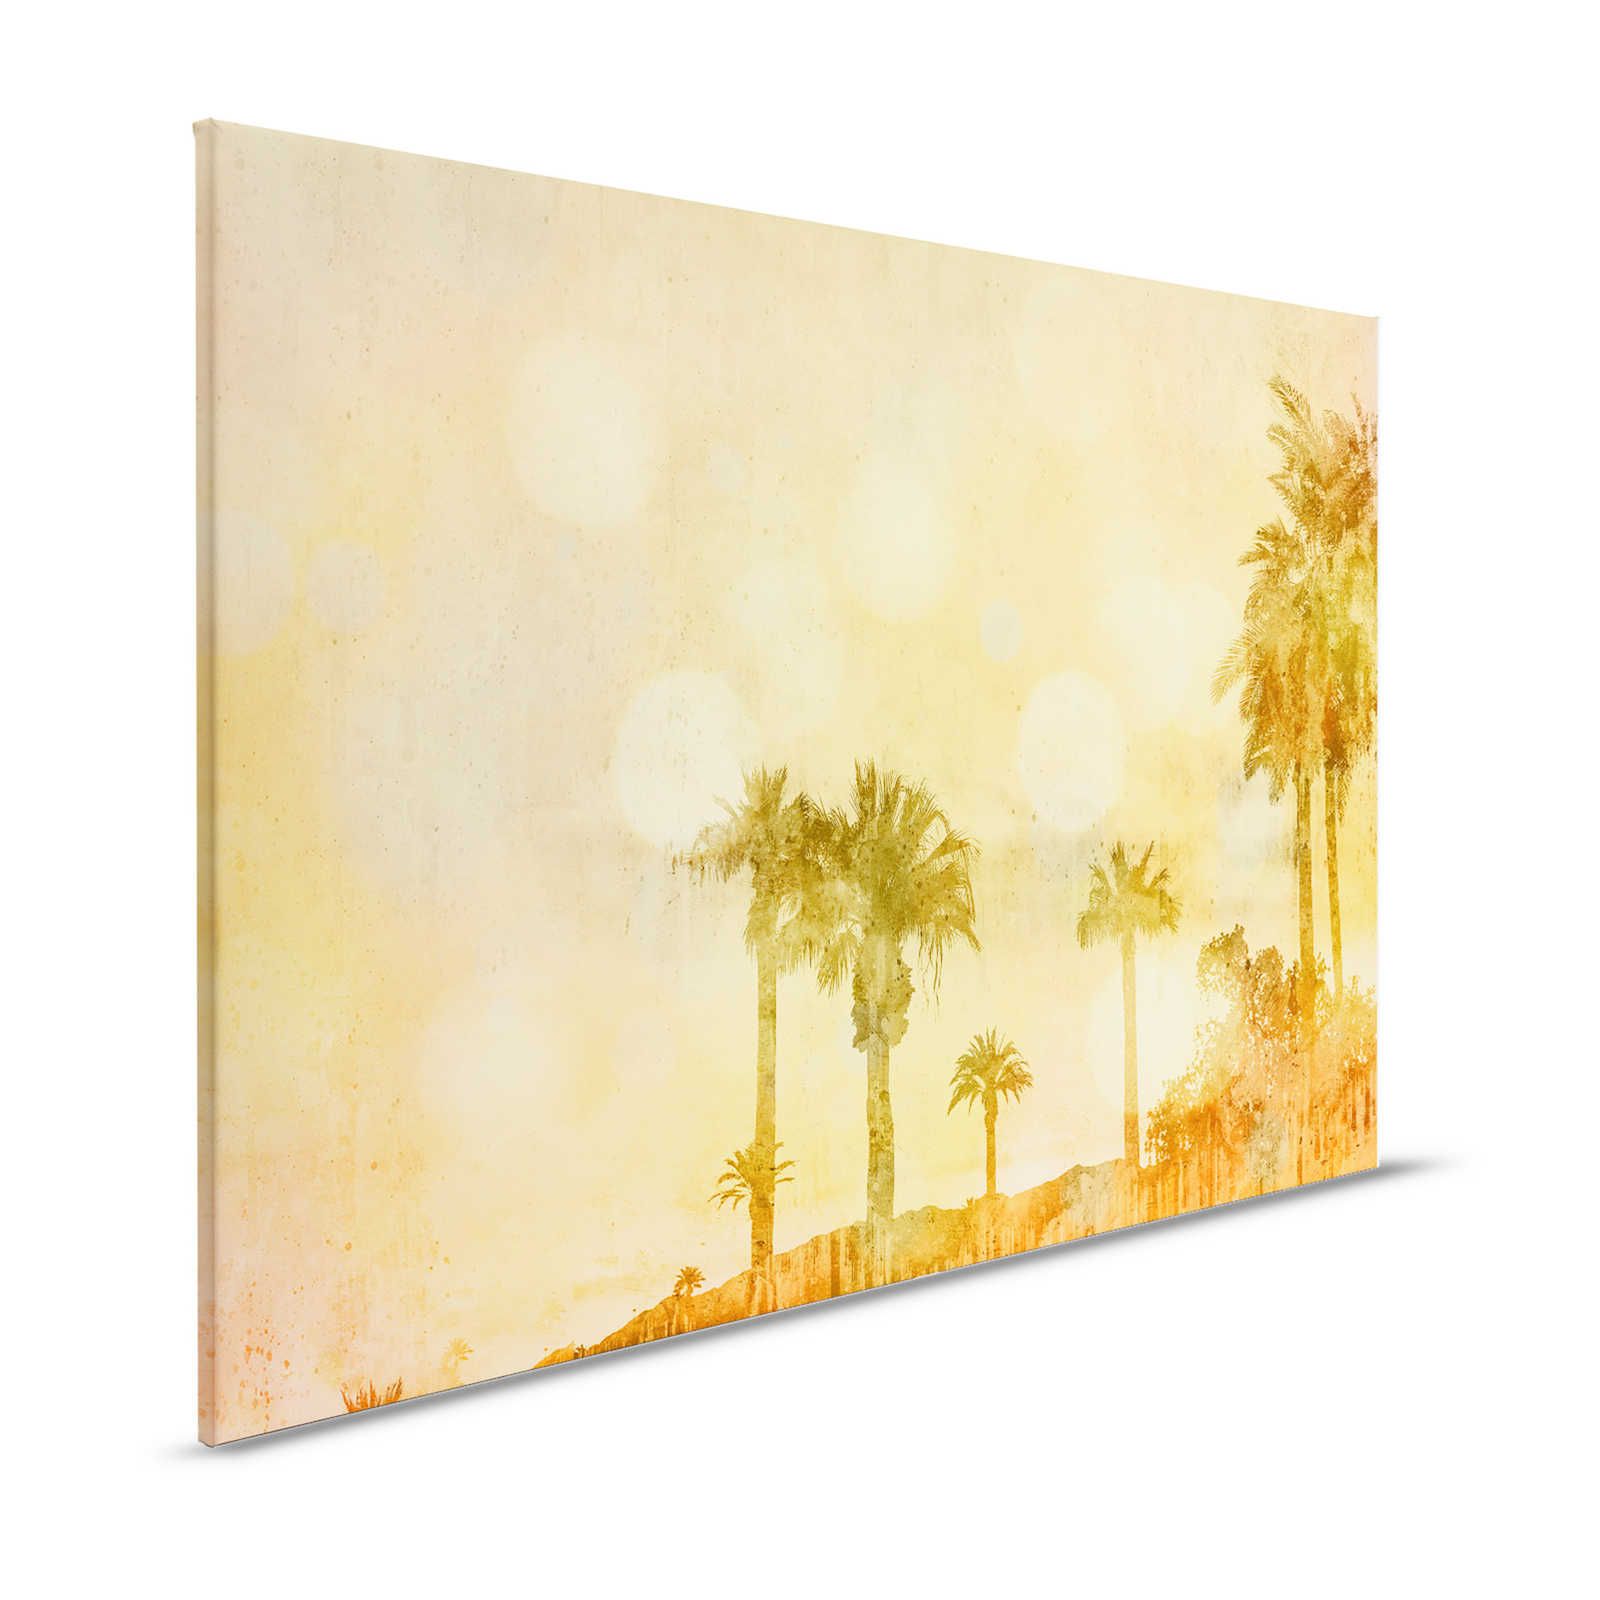 Canvas painting Palm Beach in Sunset with Light Effect - 1,20 m x 0,80 m
